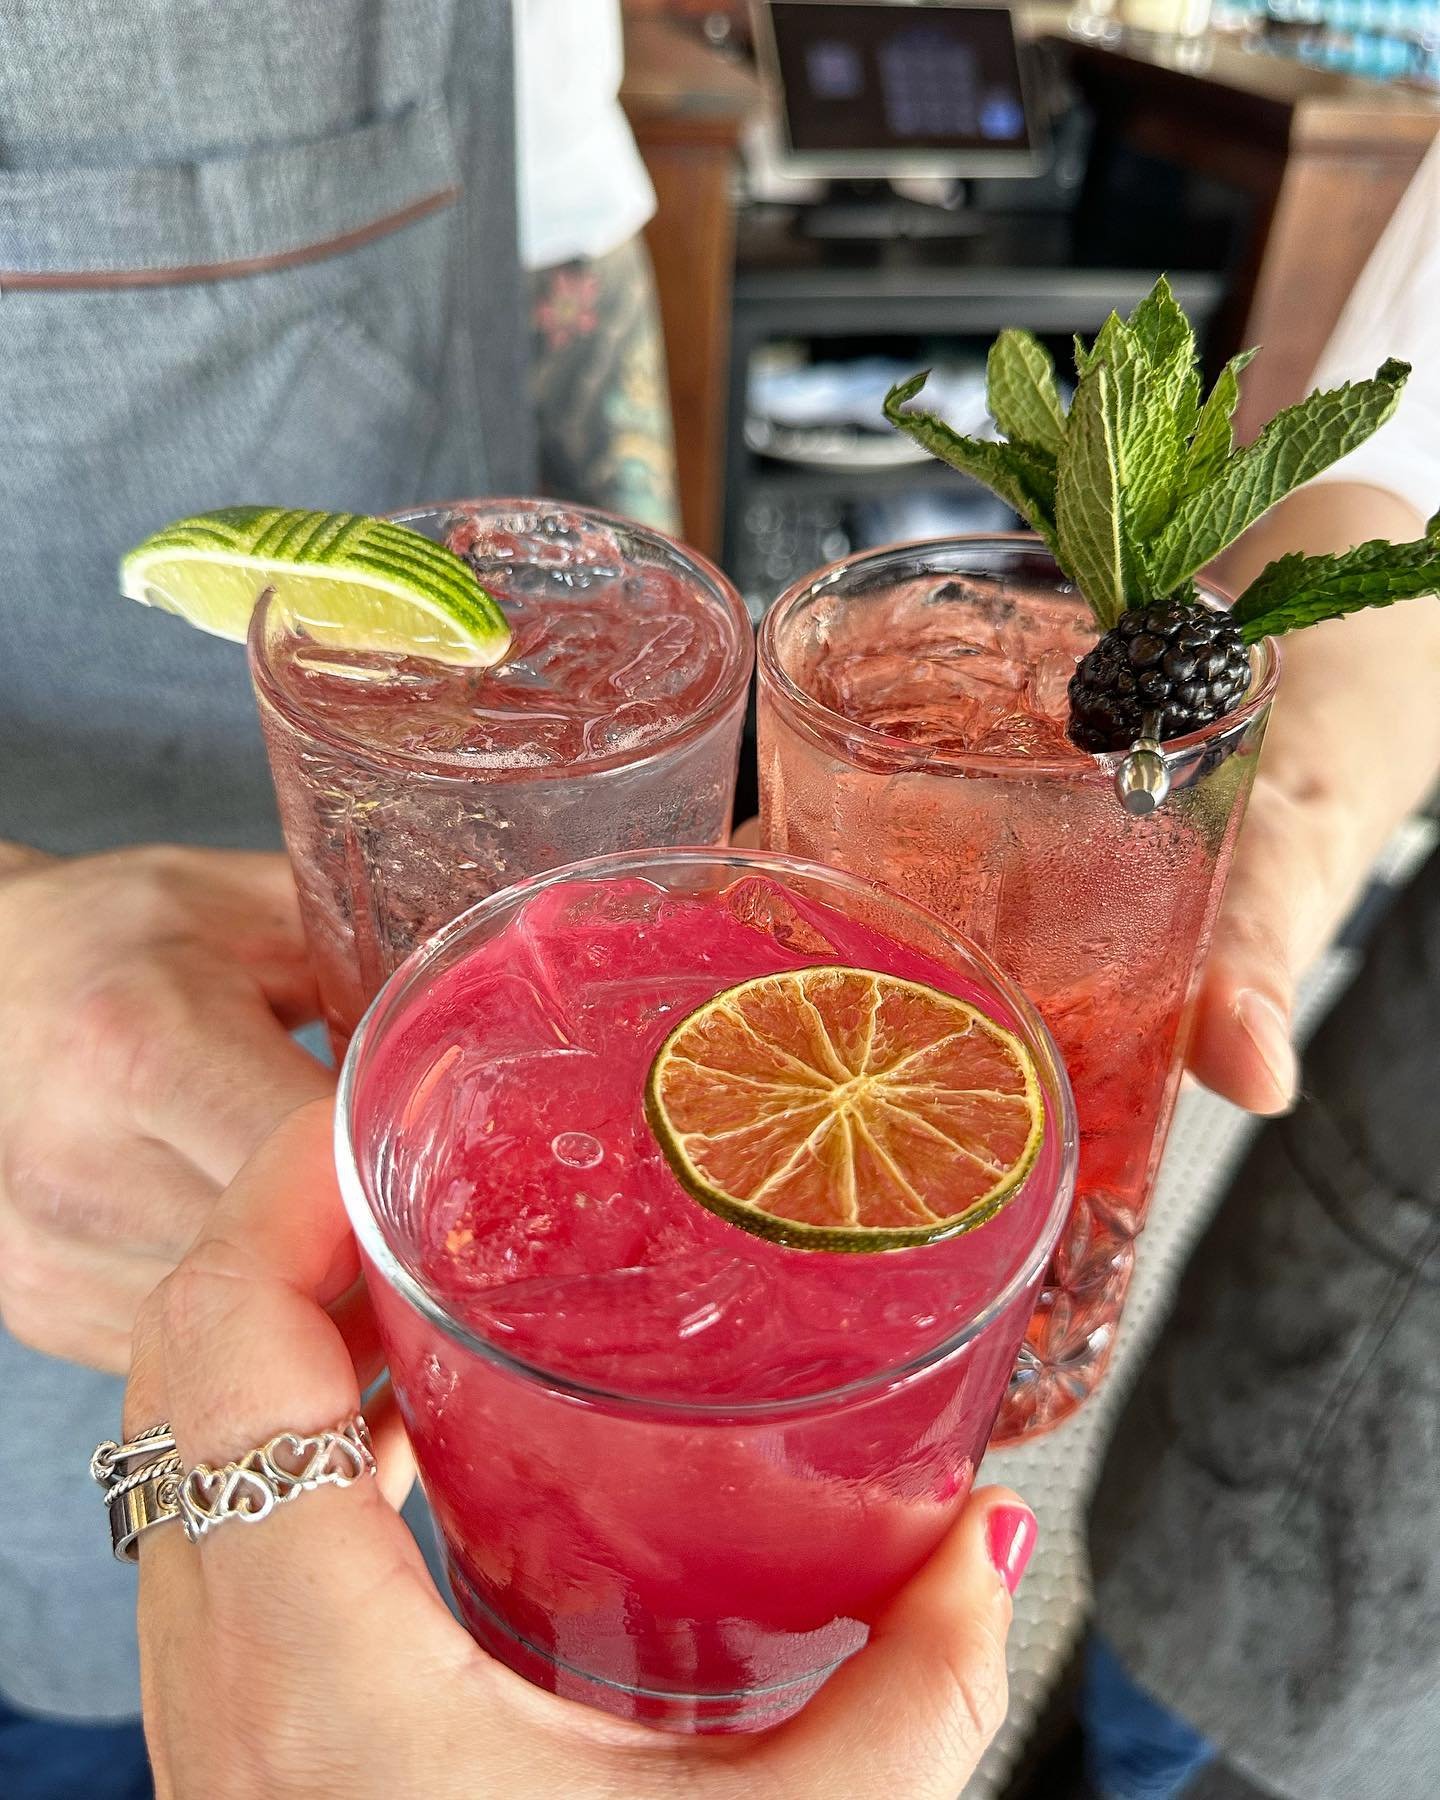 Cheers to rooftop season opening soon ☀️ 🌺 🍹 

🌺 Stay tuned for announcements on the opening of our rooftop

#thepompanoct #norwalkct #sono #southnorway #norwalkconnecticut #eats #yum #cocktail #203 #203local #rooftop #rooftopseason #outdoordining